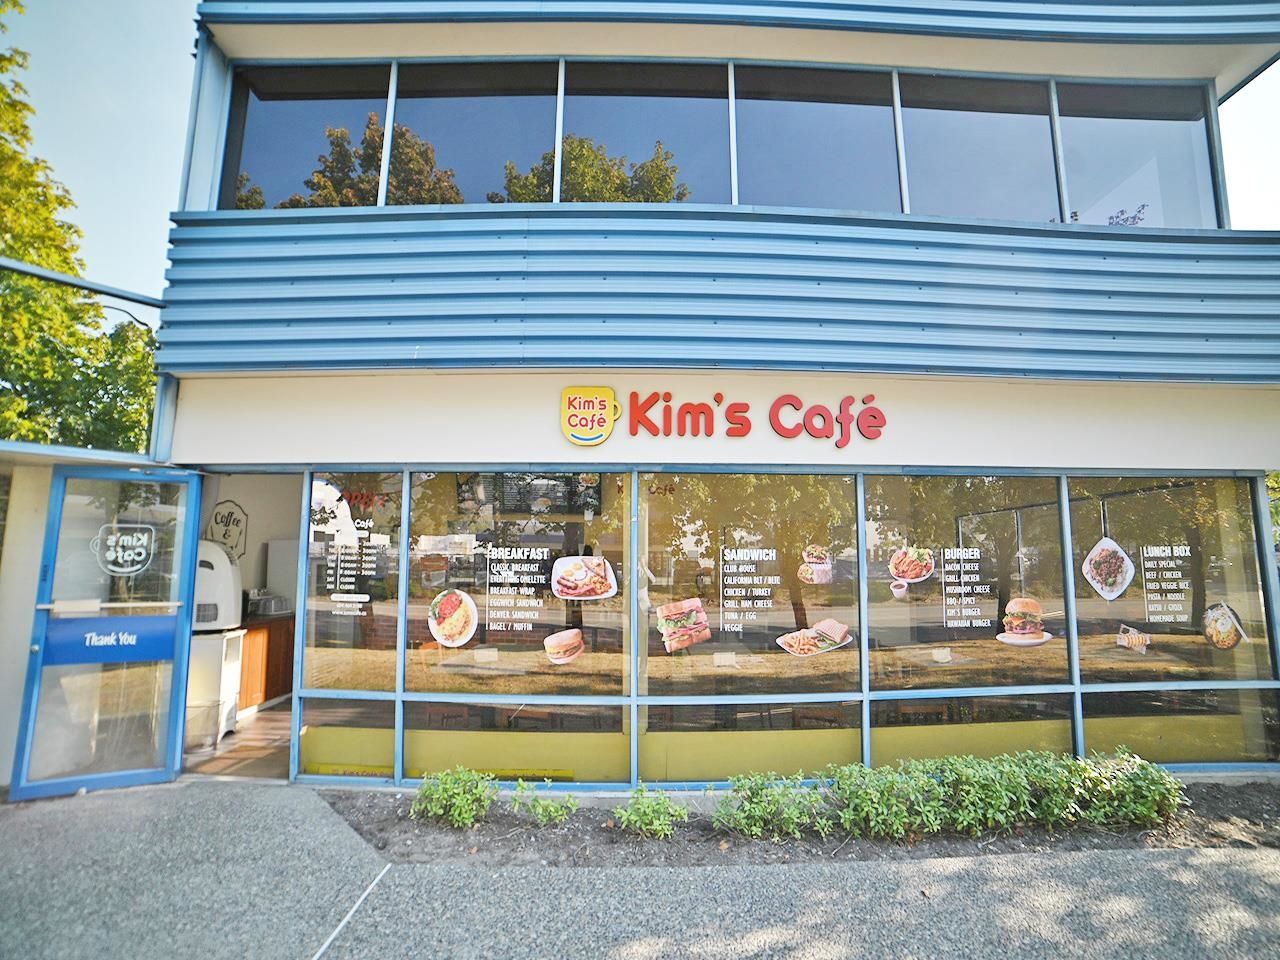 Main Photo: 29 91 GOLDEN Drive in Coquitlam: Cape Horn Business for sale : MLS®# C8047510